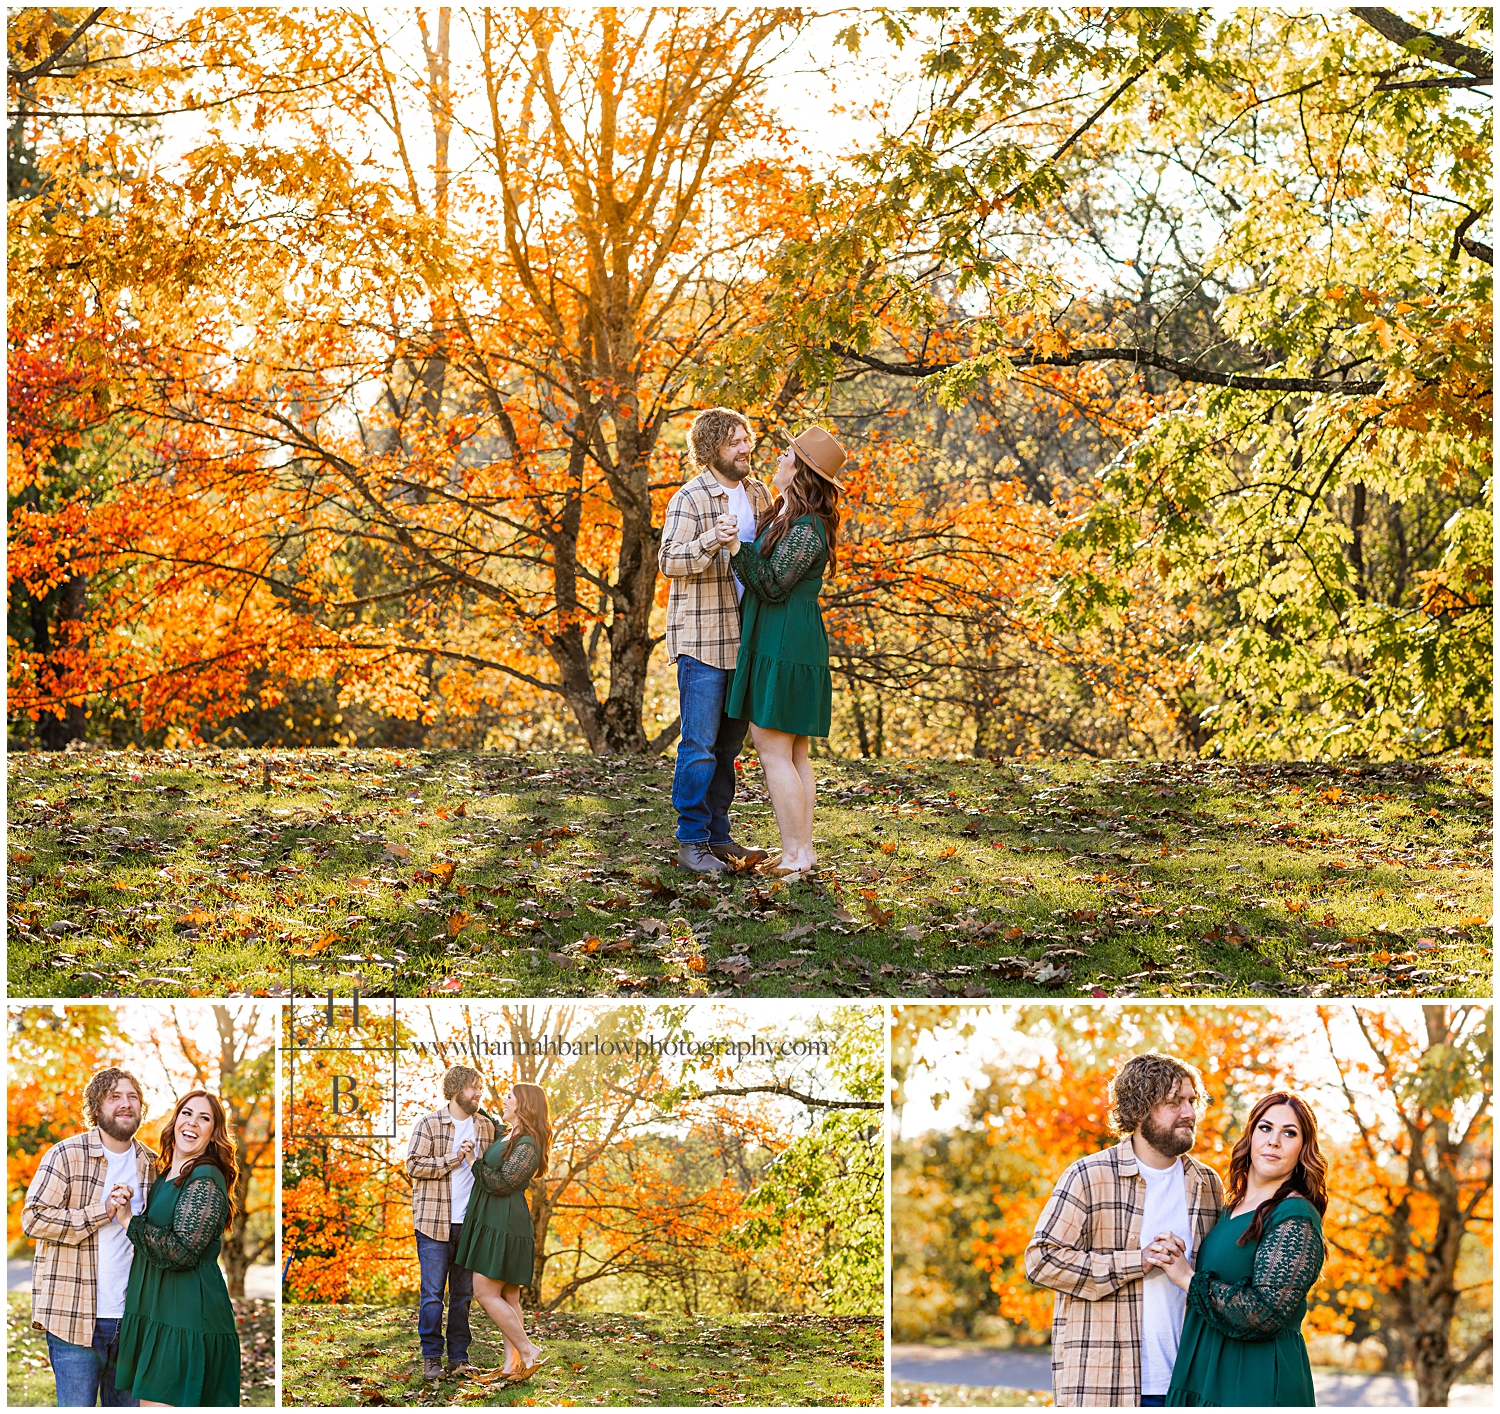 Fall, colorful trees surround couple who poses for engagement photos.